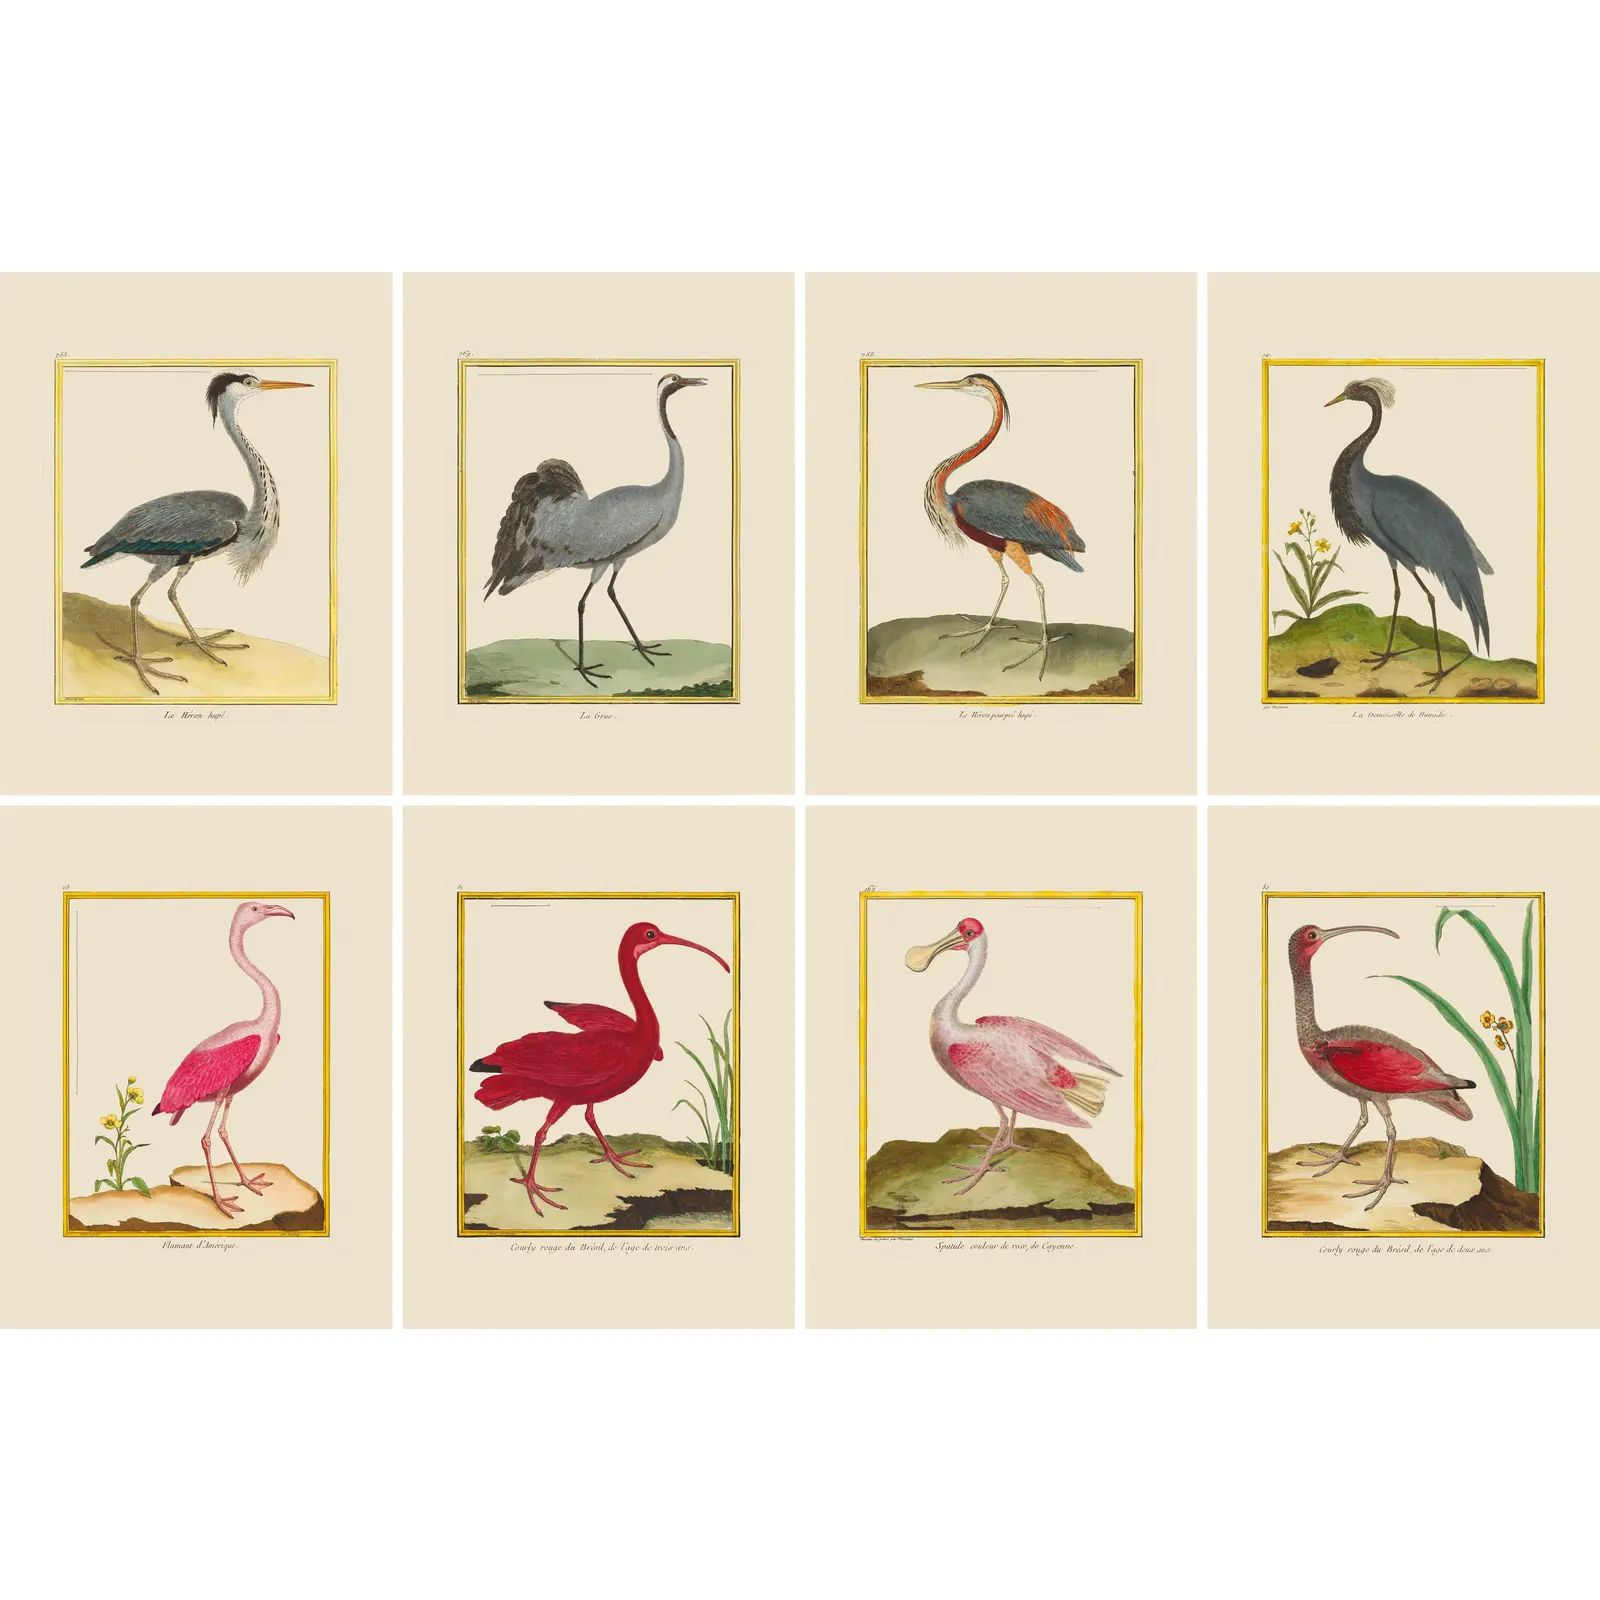 Shore Bird Grouping by Martinet Blue and Pink Giclee Reproductions | Chairish